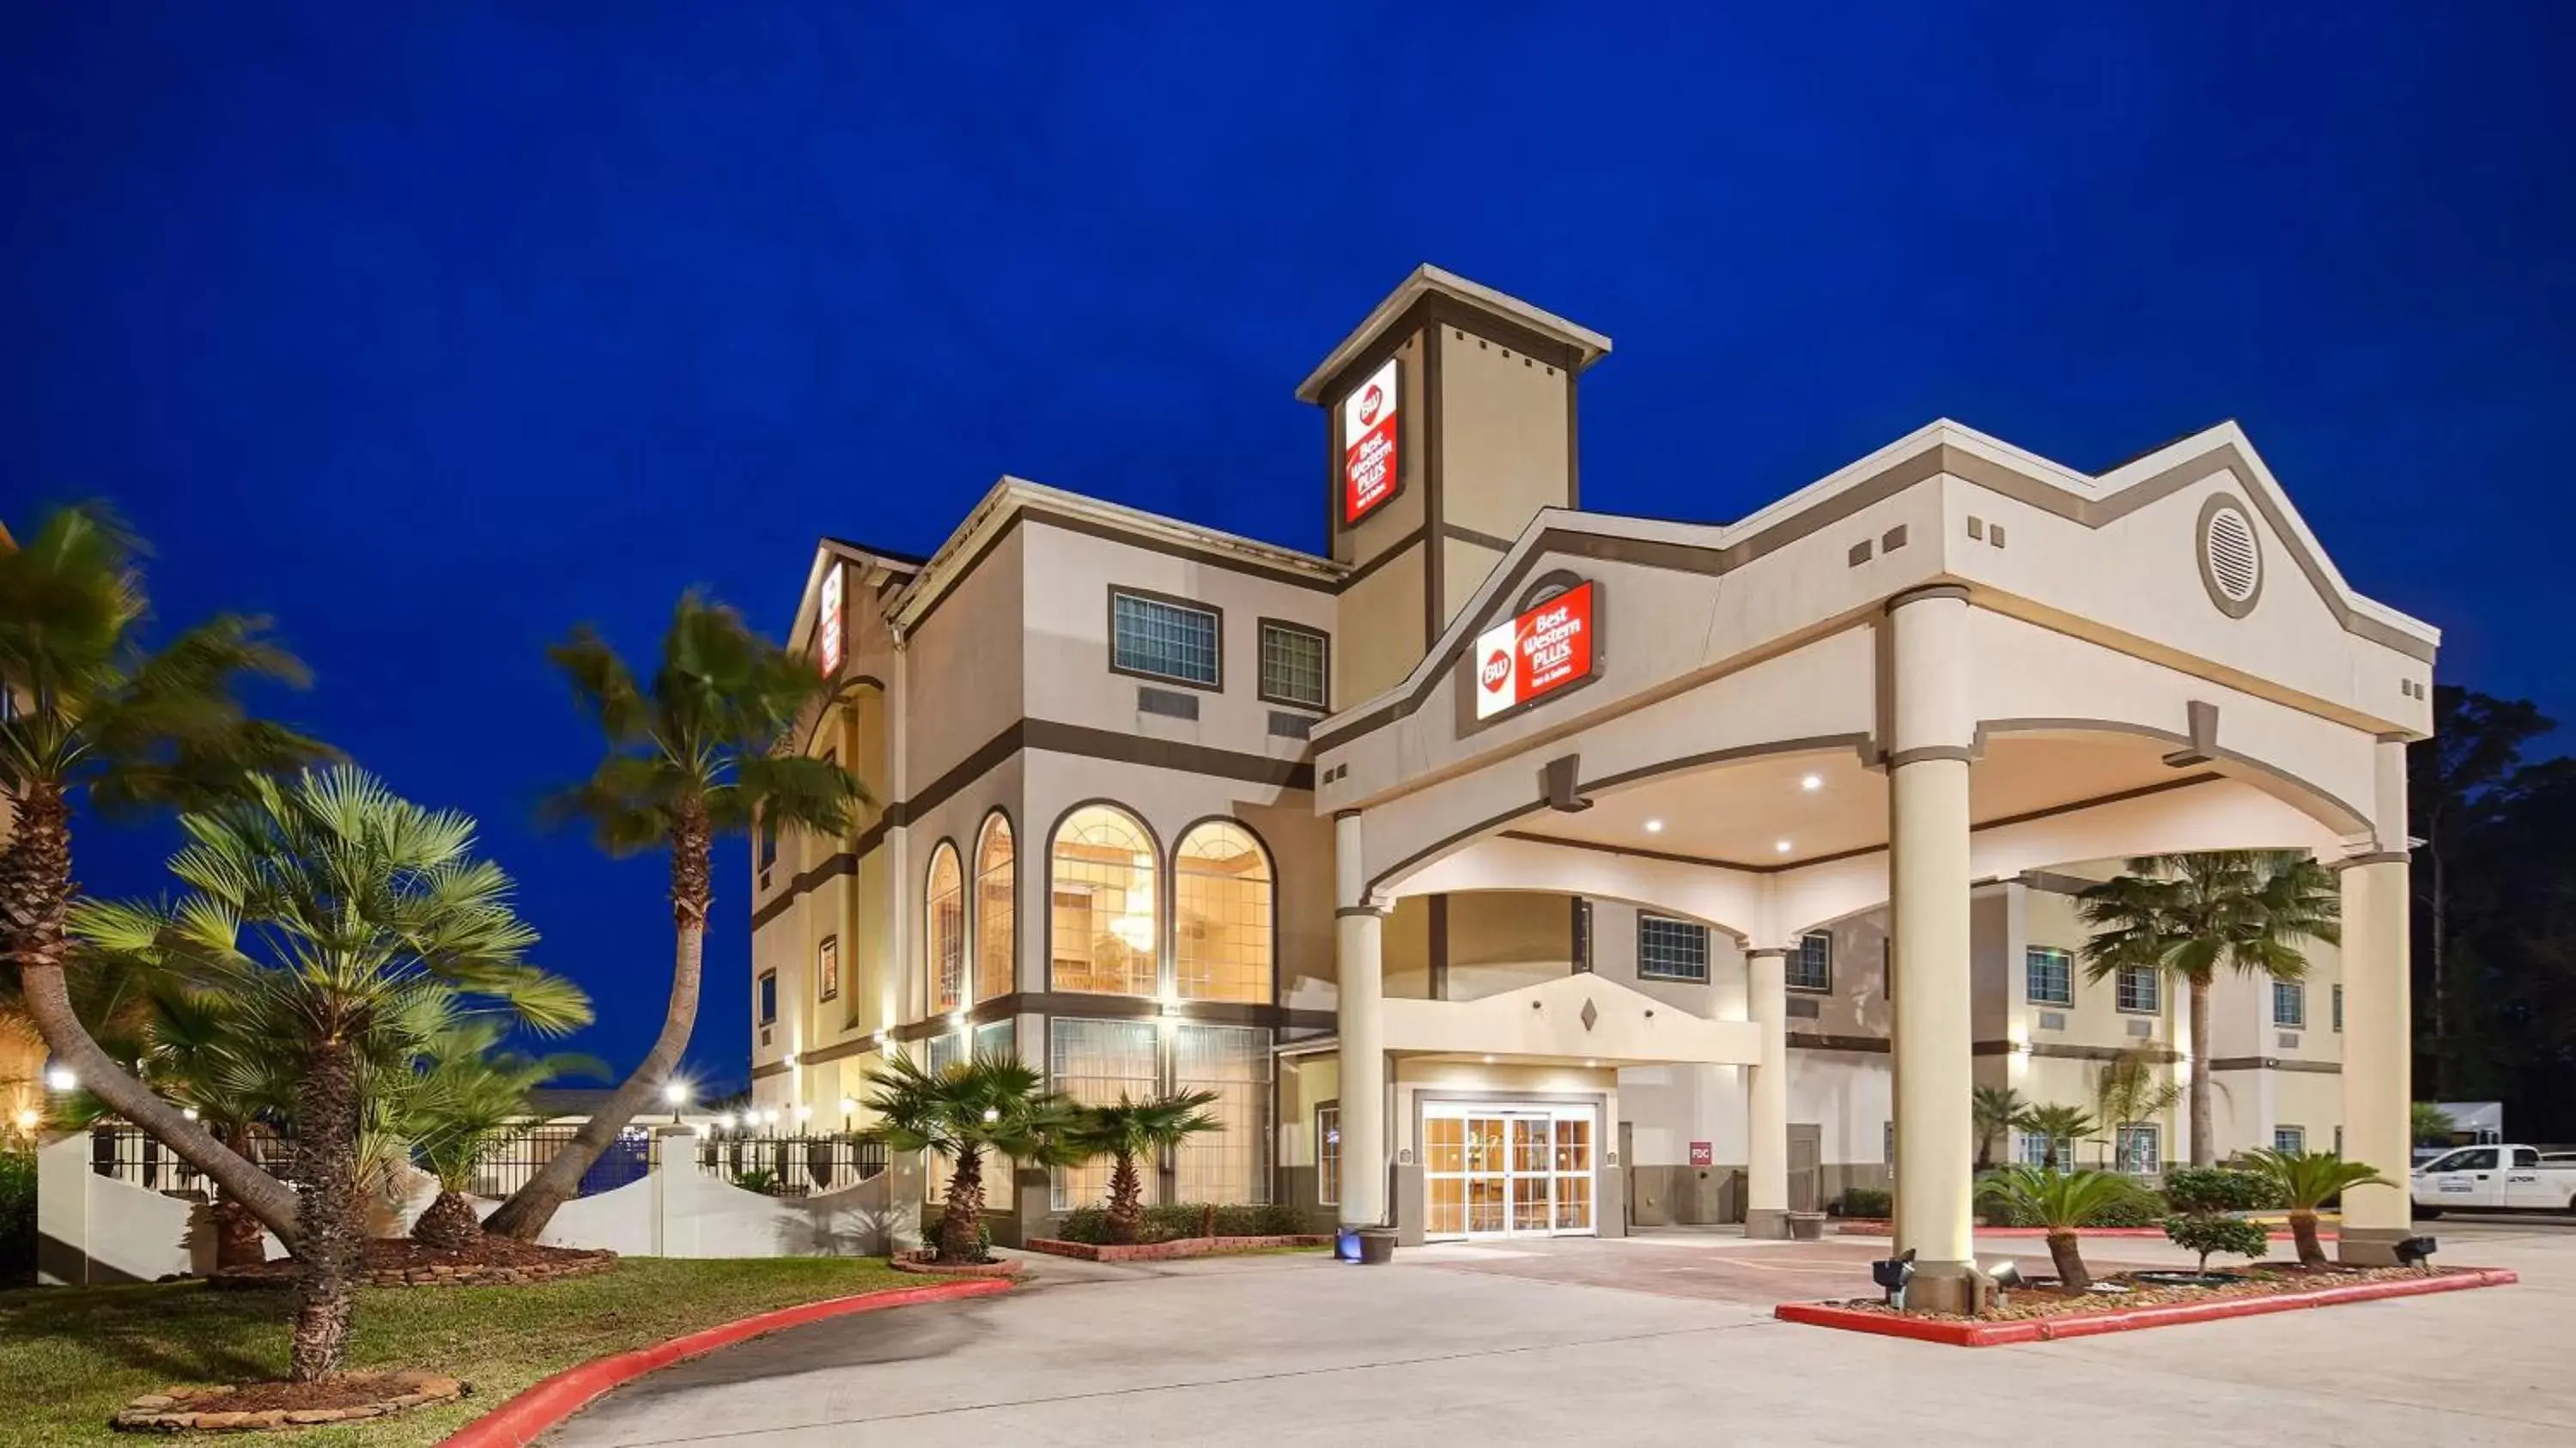 Property building in Best Western Plus New Caney Inn & Suites